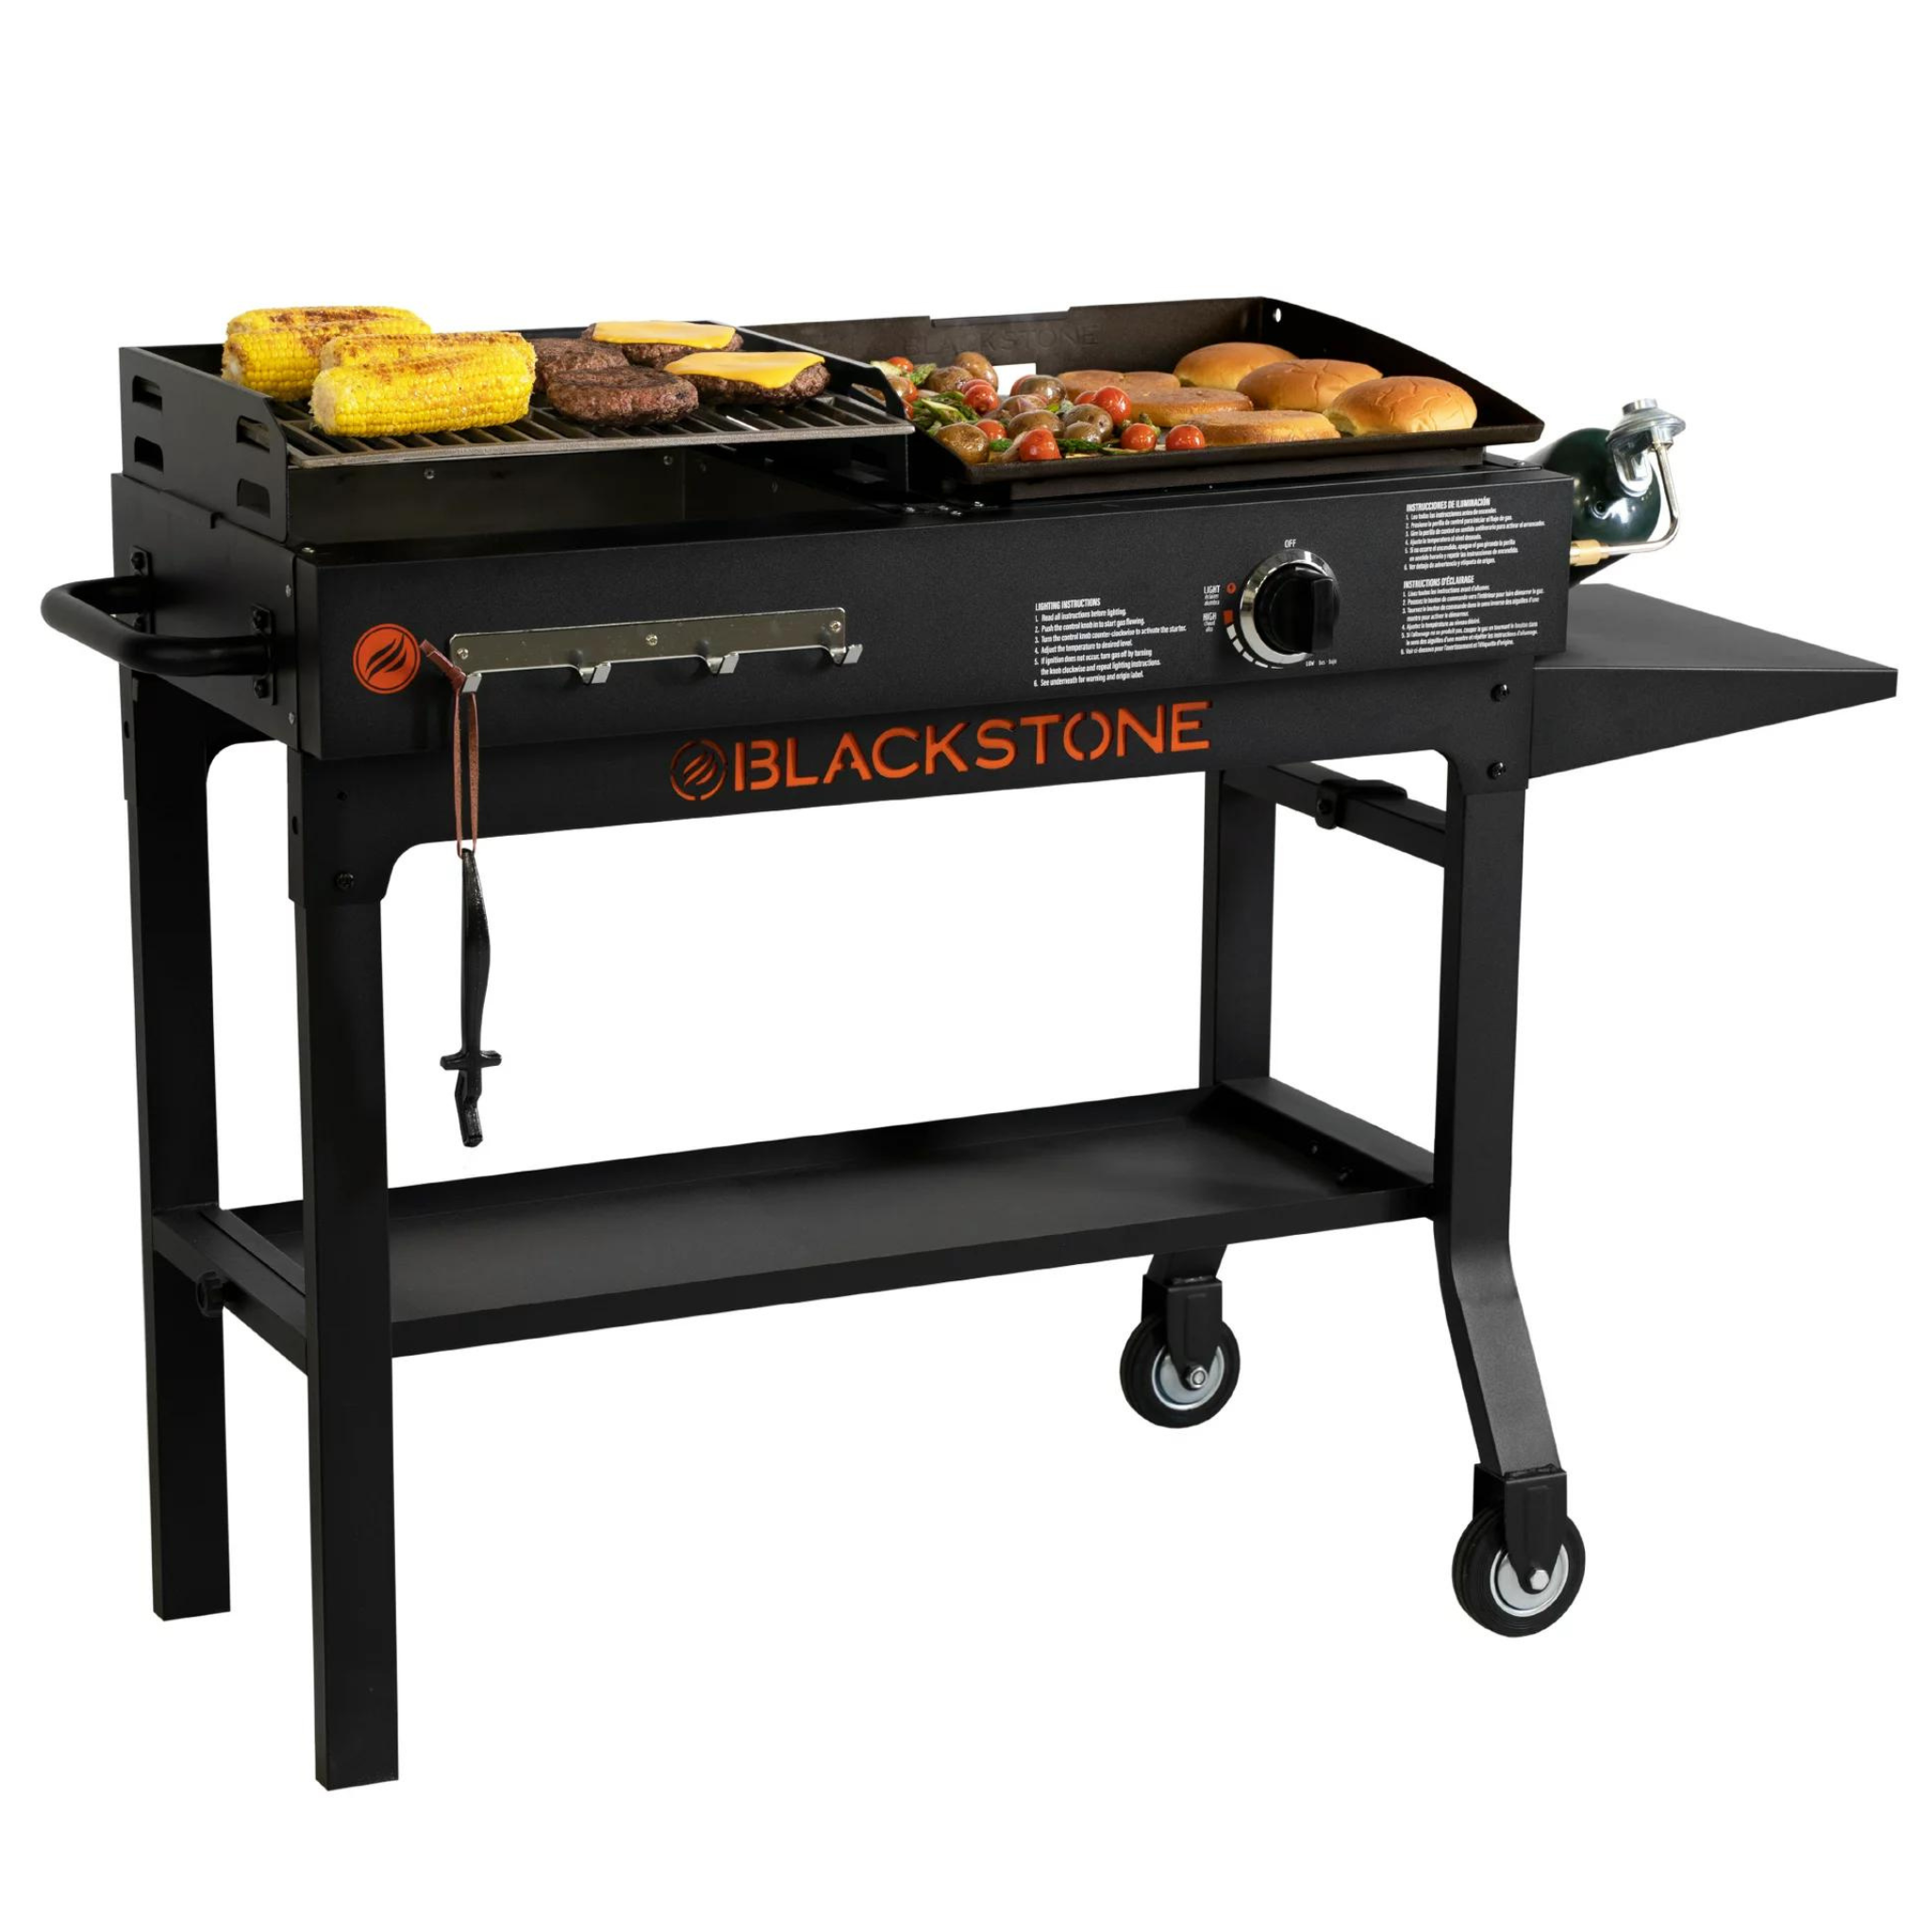 17" Blackstone Duo Propane Griddle & Charcoal Grill Combo